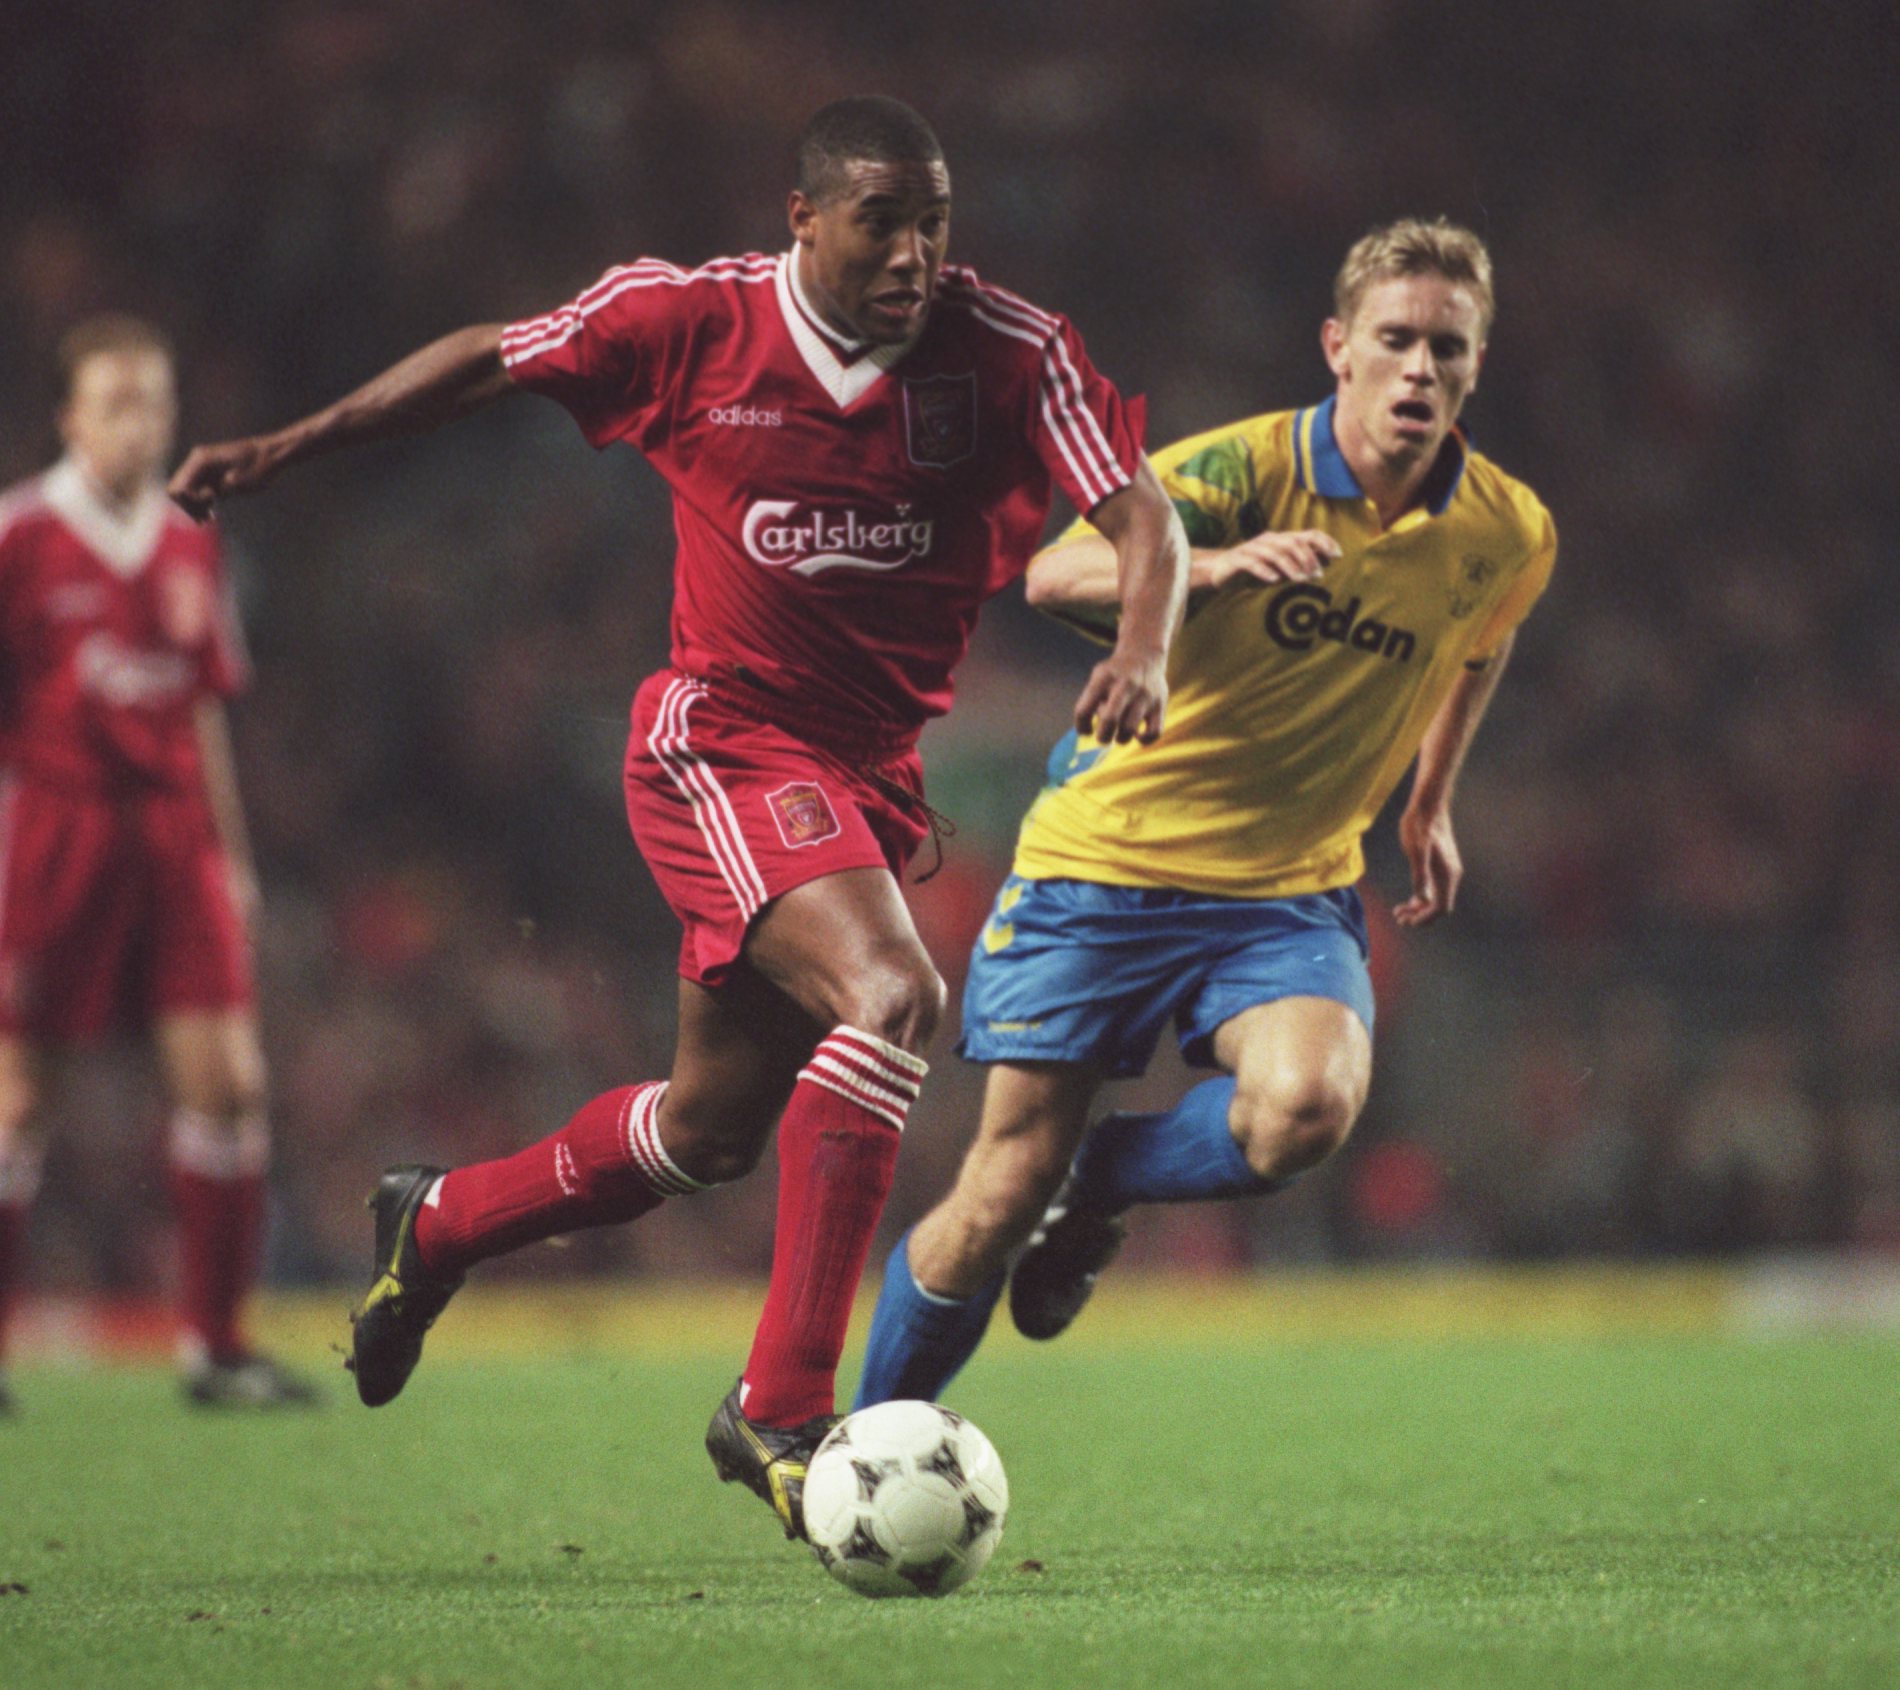 31 OCT 1995:  JOHN BARNES OF LIVERPOOL IN ACTION  DURING THE 2ND ROUND 2ND LEG UEFA CUP MATCH AGAINST BRONDBY AT ANFIELD. BRONDBY WON 1-0.  Mandatory Credit: Clive Brunskill/ALLSPORT